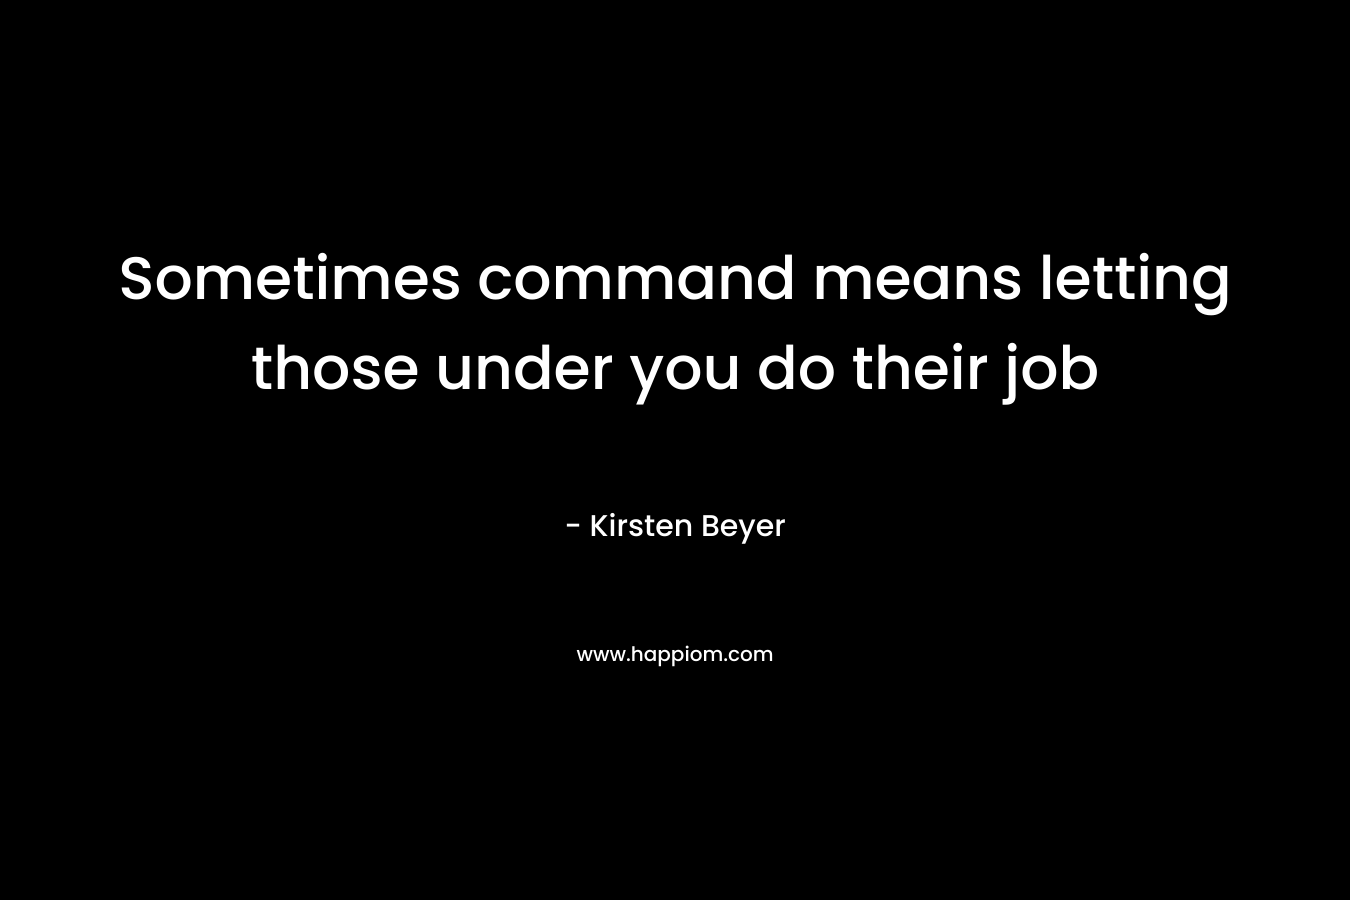 Sometimes command means letting those under you do their job